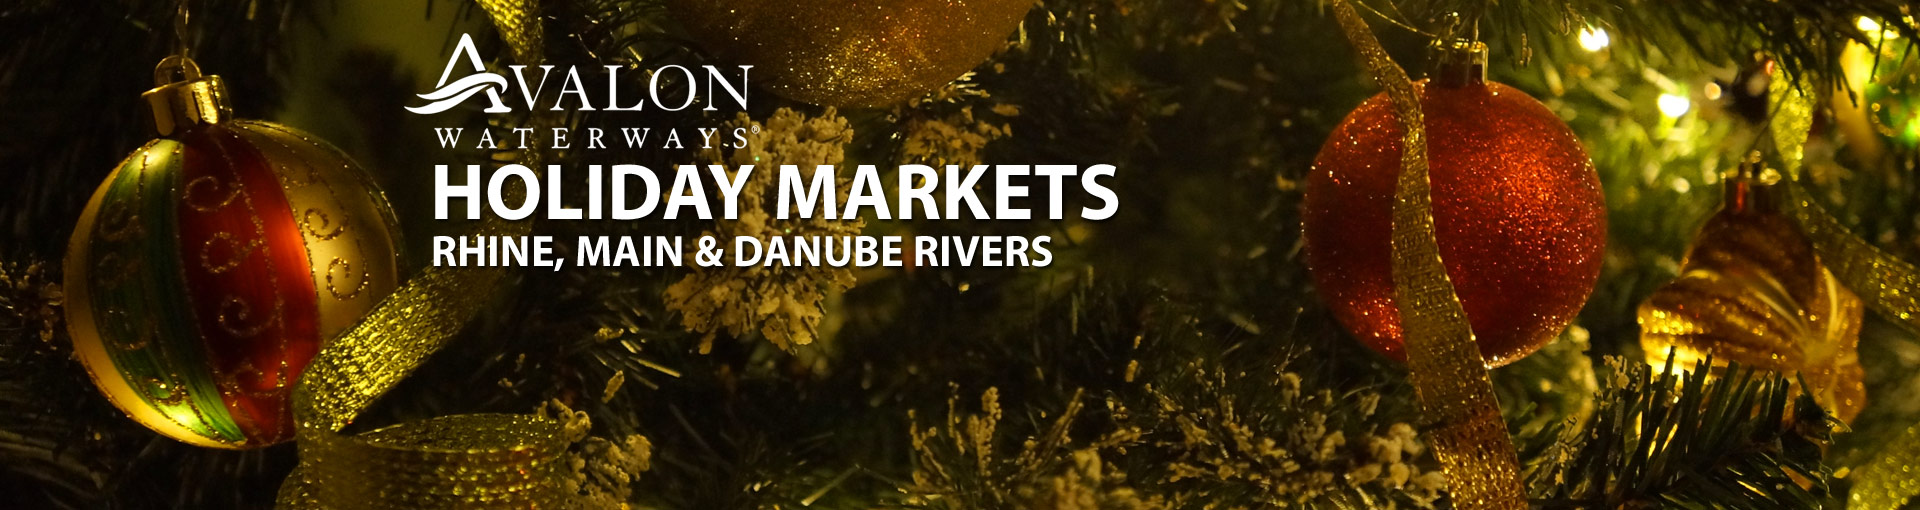 Avalon Waterways Holiday Markets River Cruises in Europe